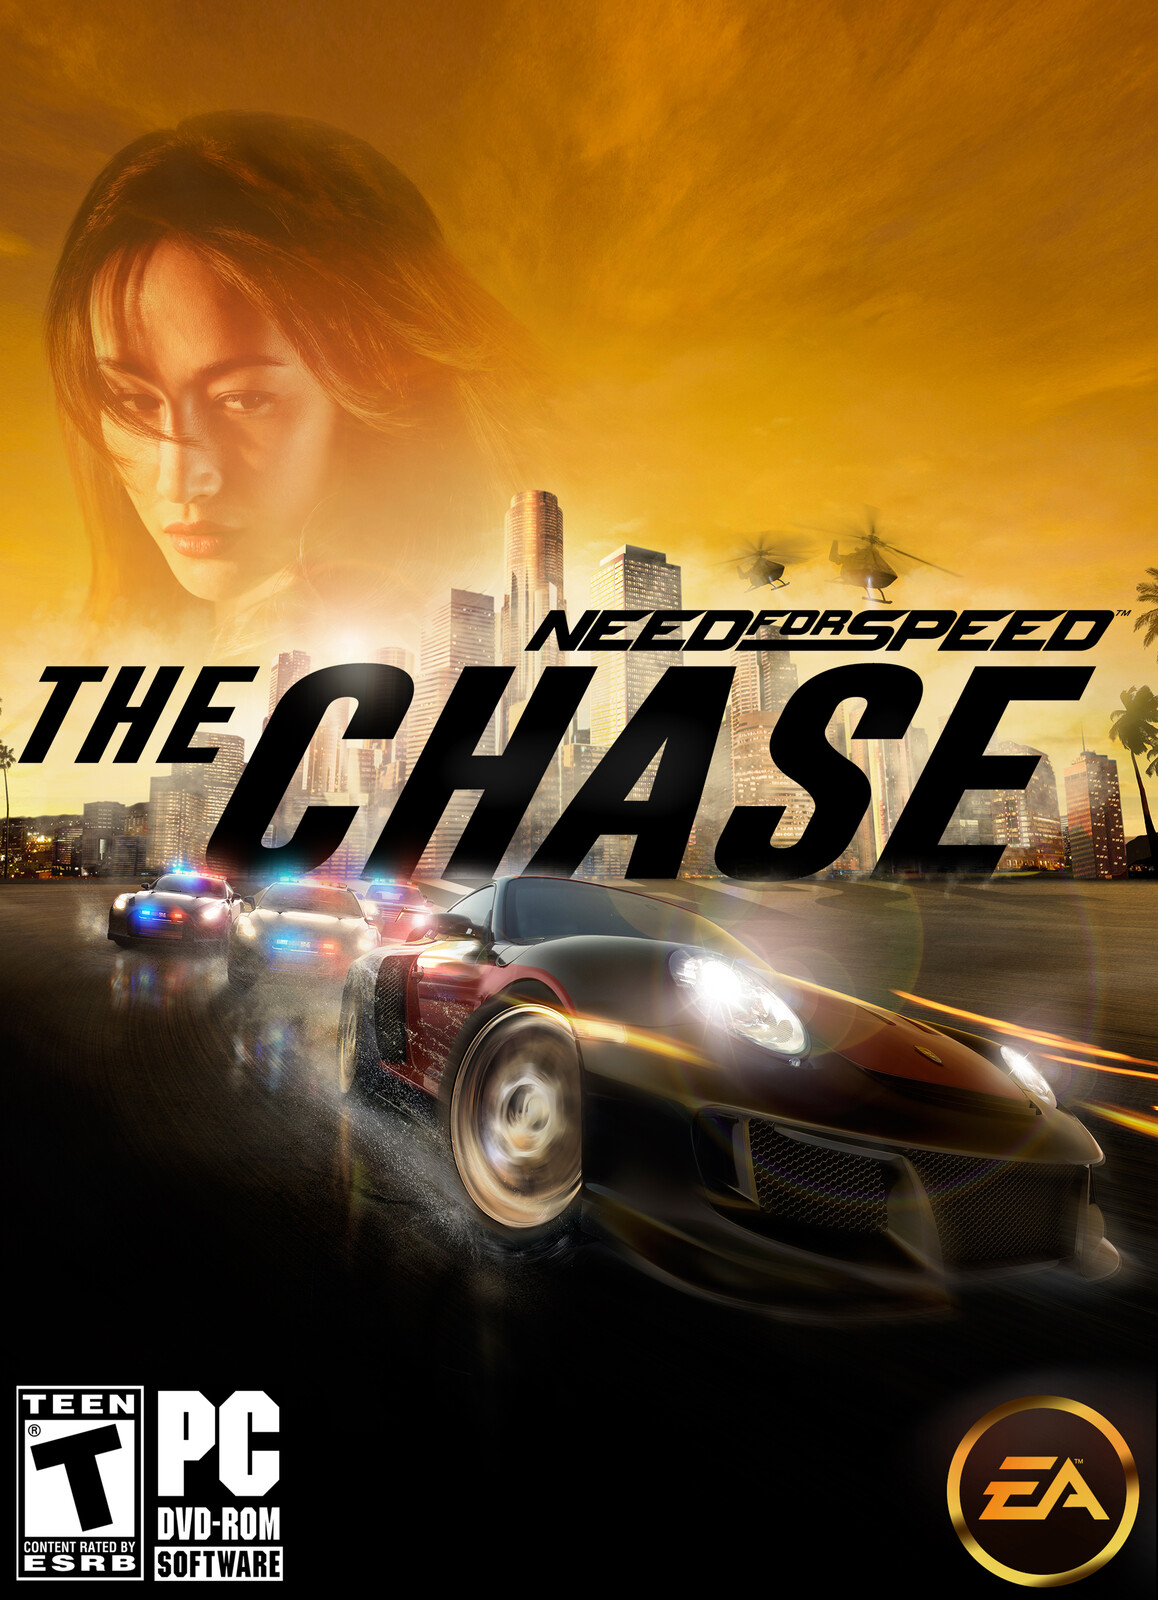 Need for Speed: Undercover (Based on the original in-development logo)